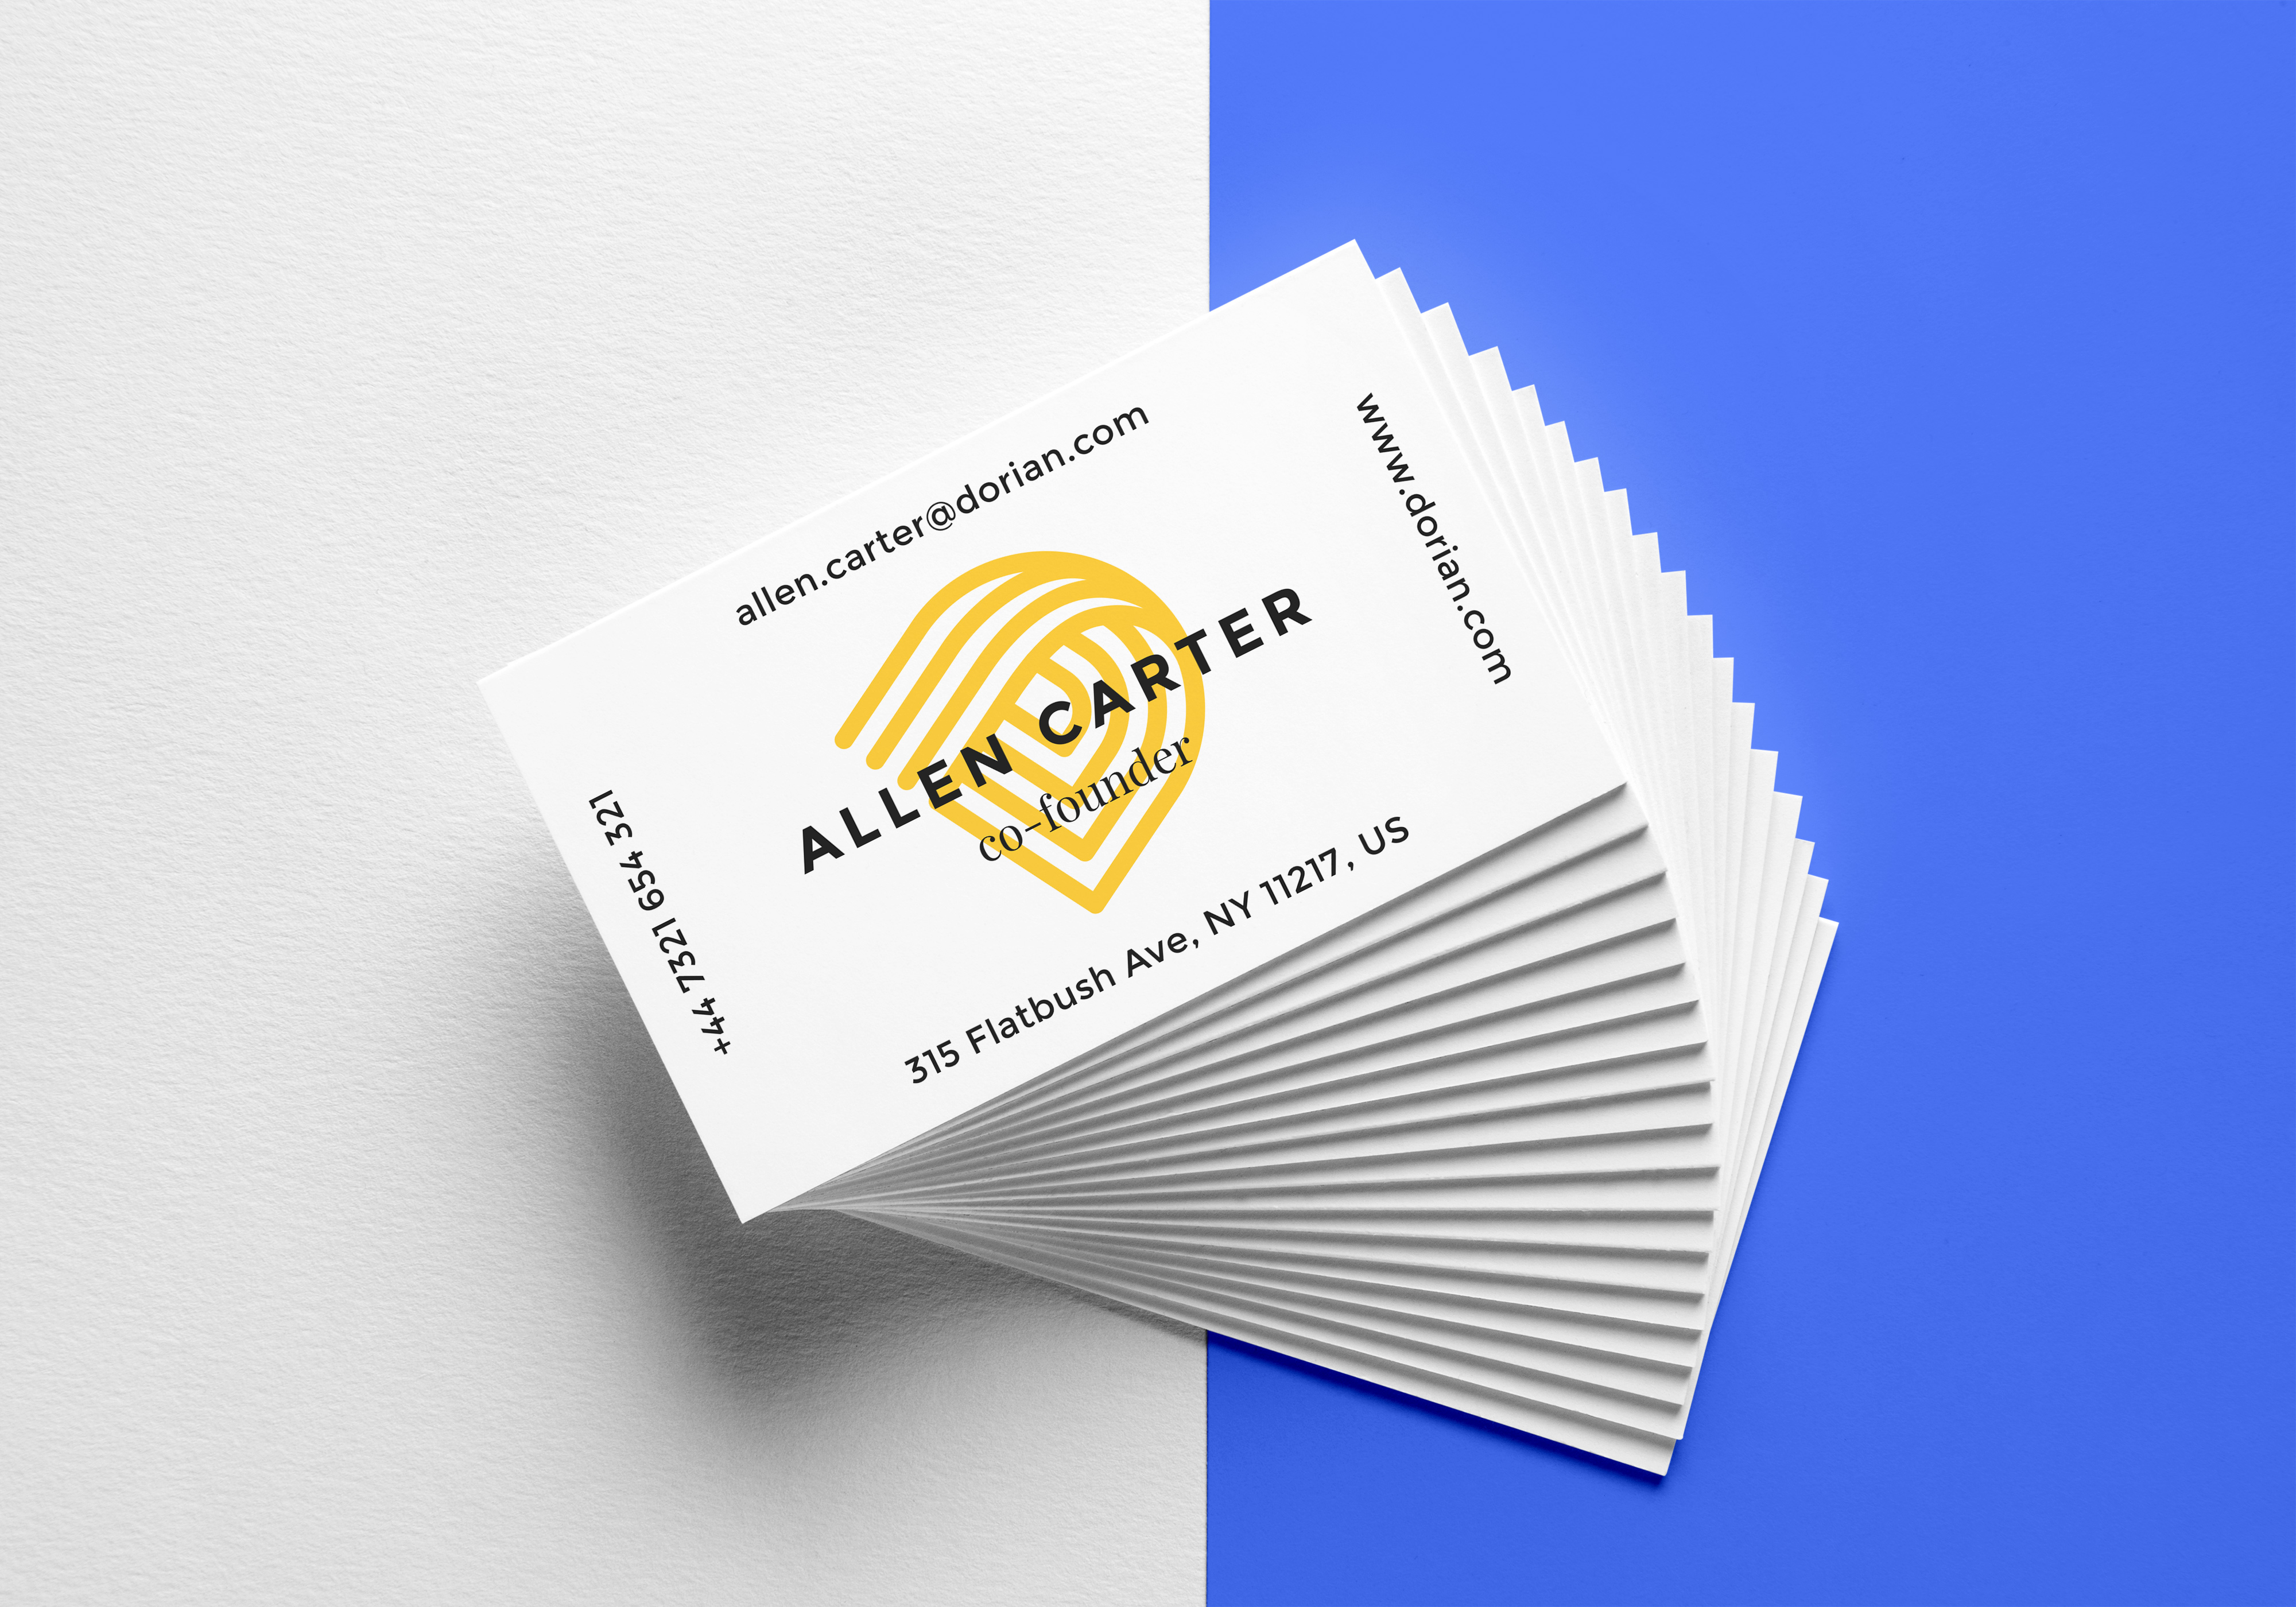 Download Free Realistic Business Card MockUp - LTHEME